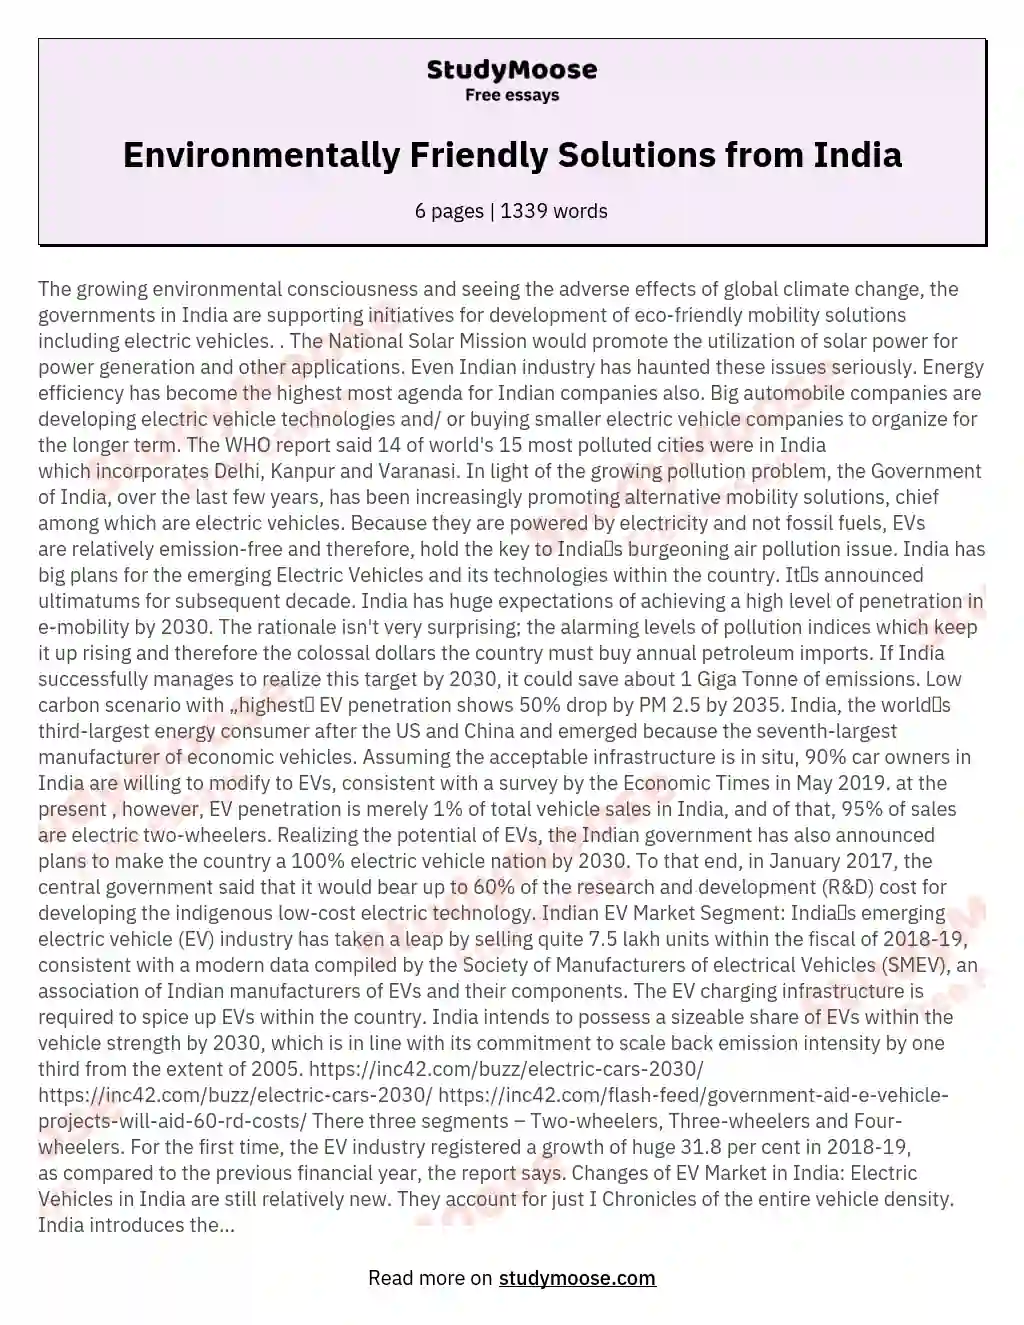 Environmentally Friendly Solutions from India essay